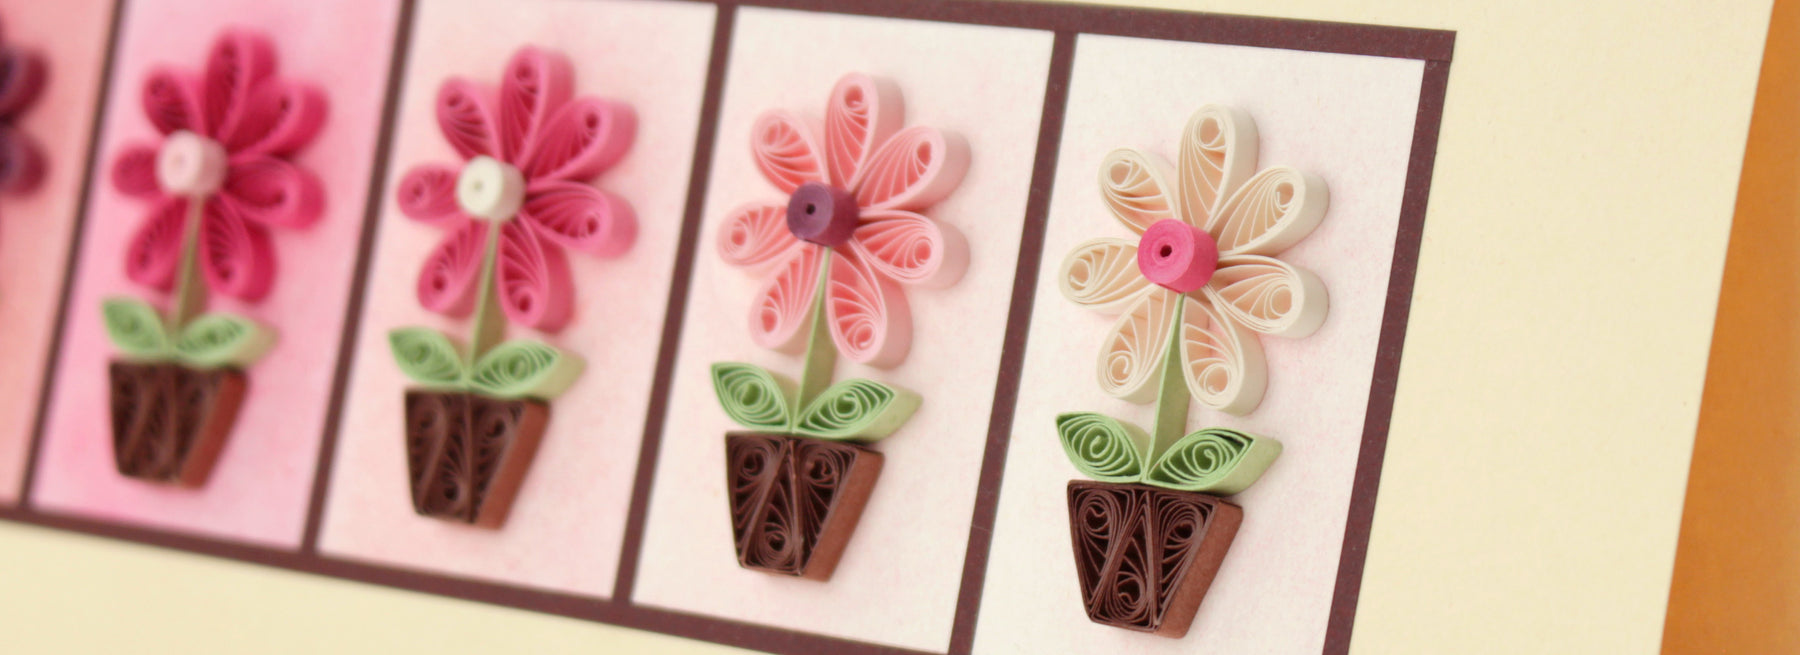 Paper Quilling For Beginners